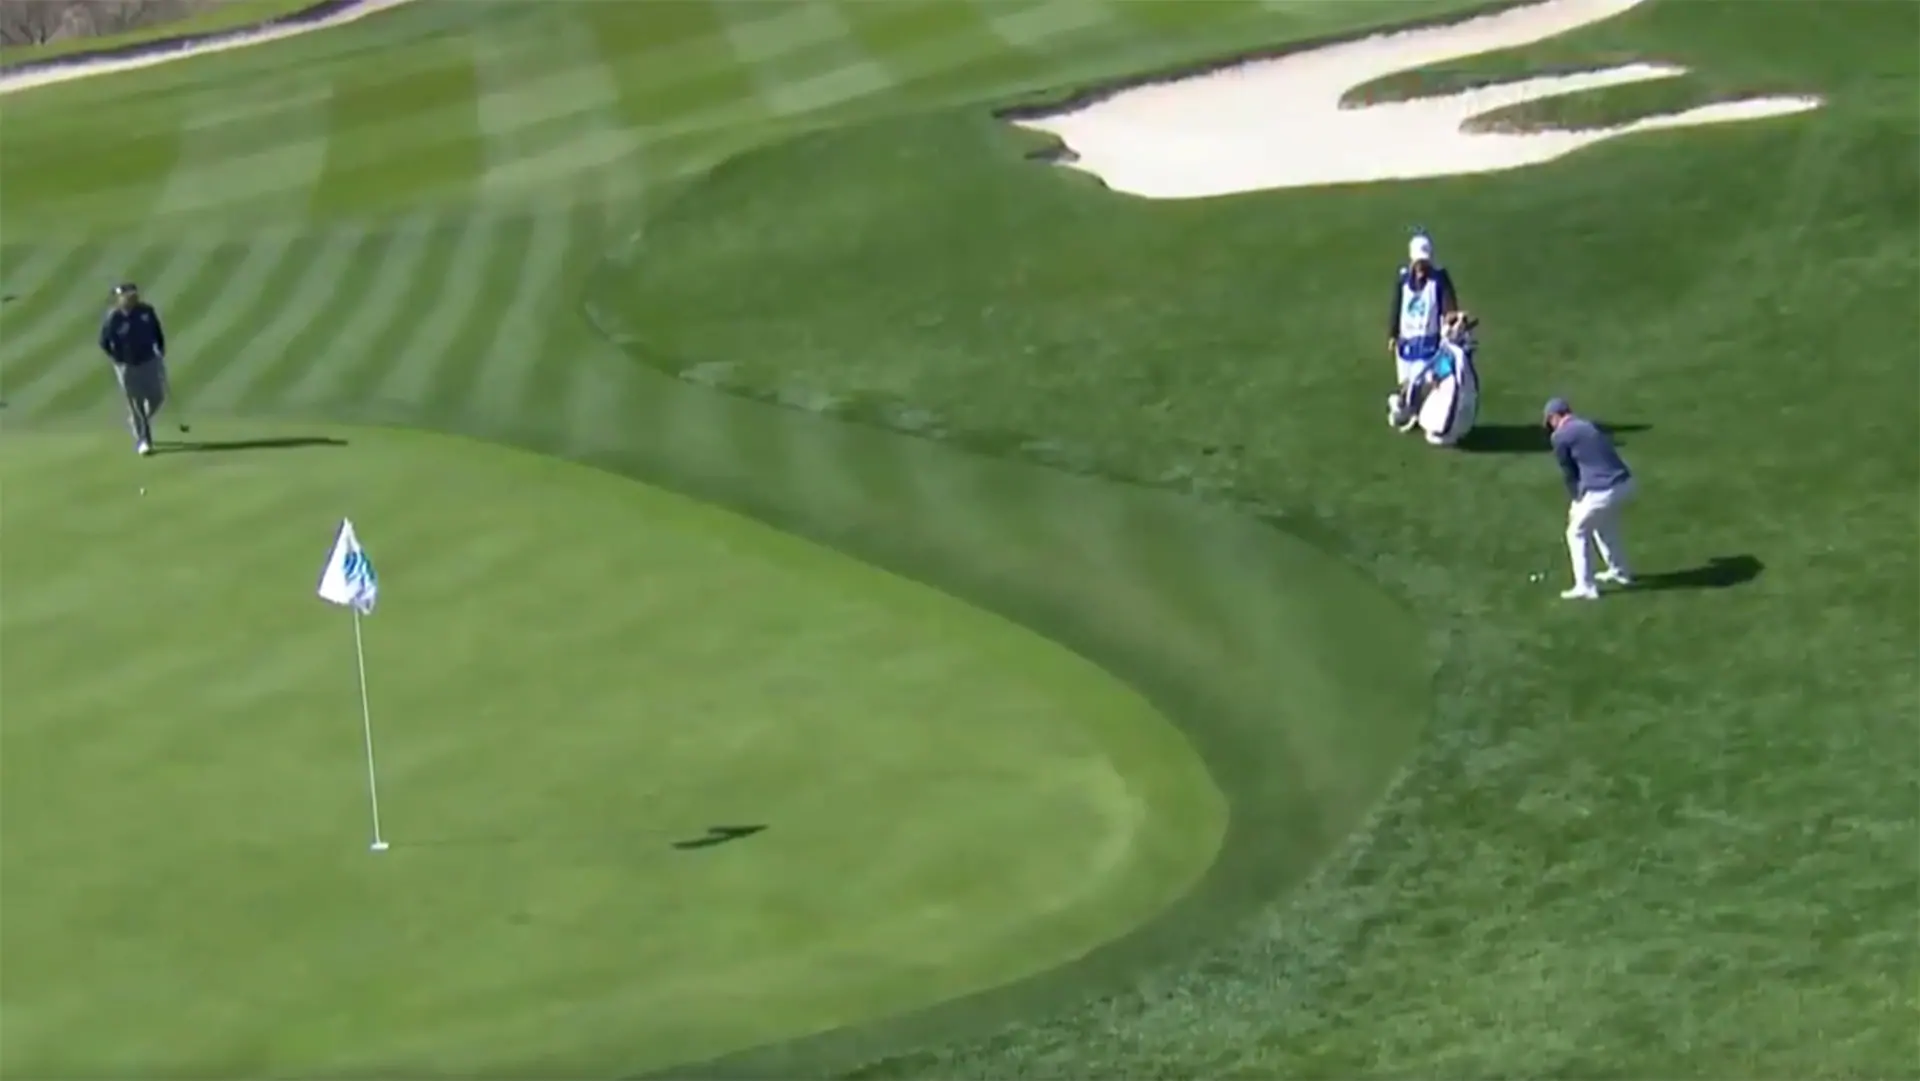 Watch: McIlroy duffs pitch, then chips in for par